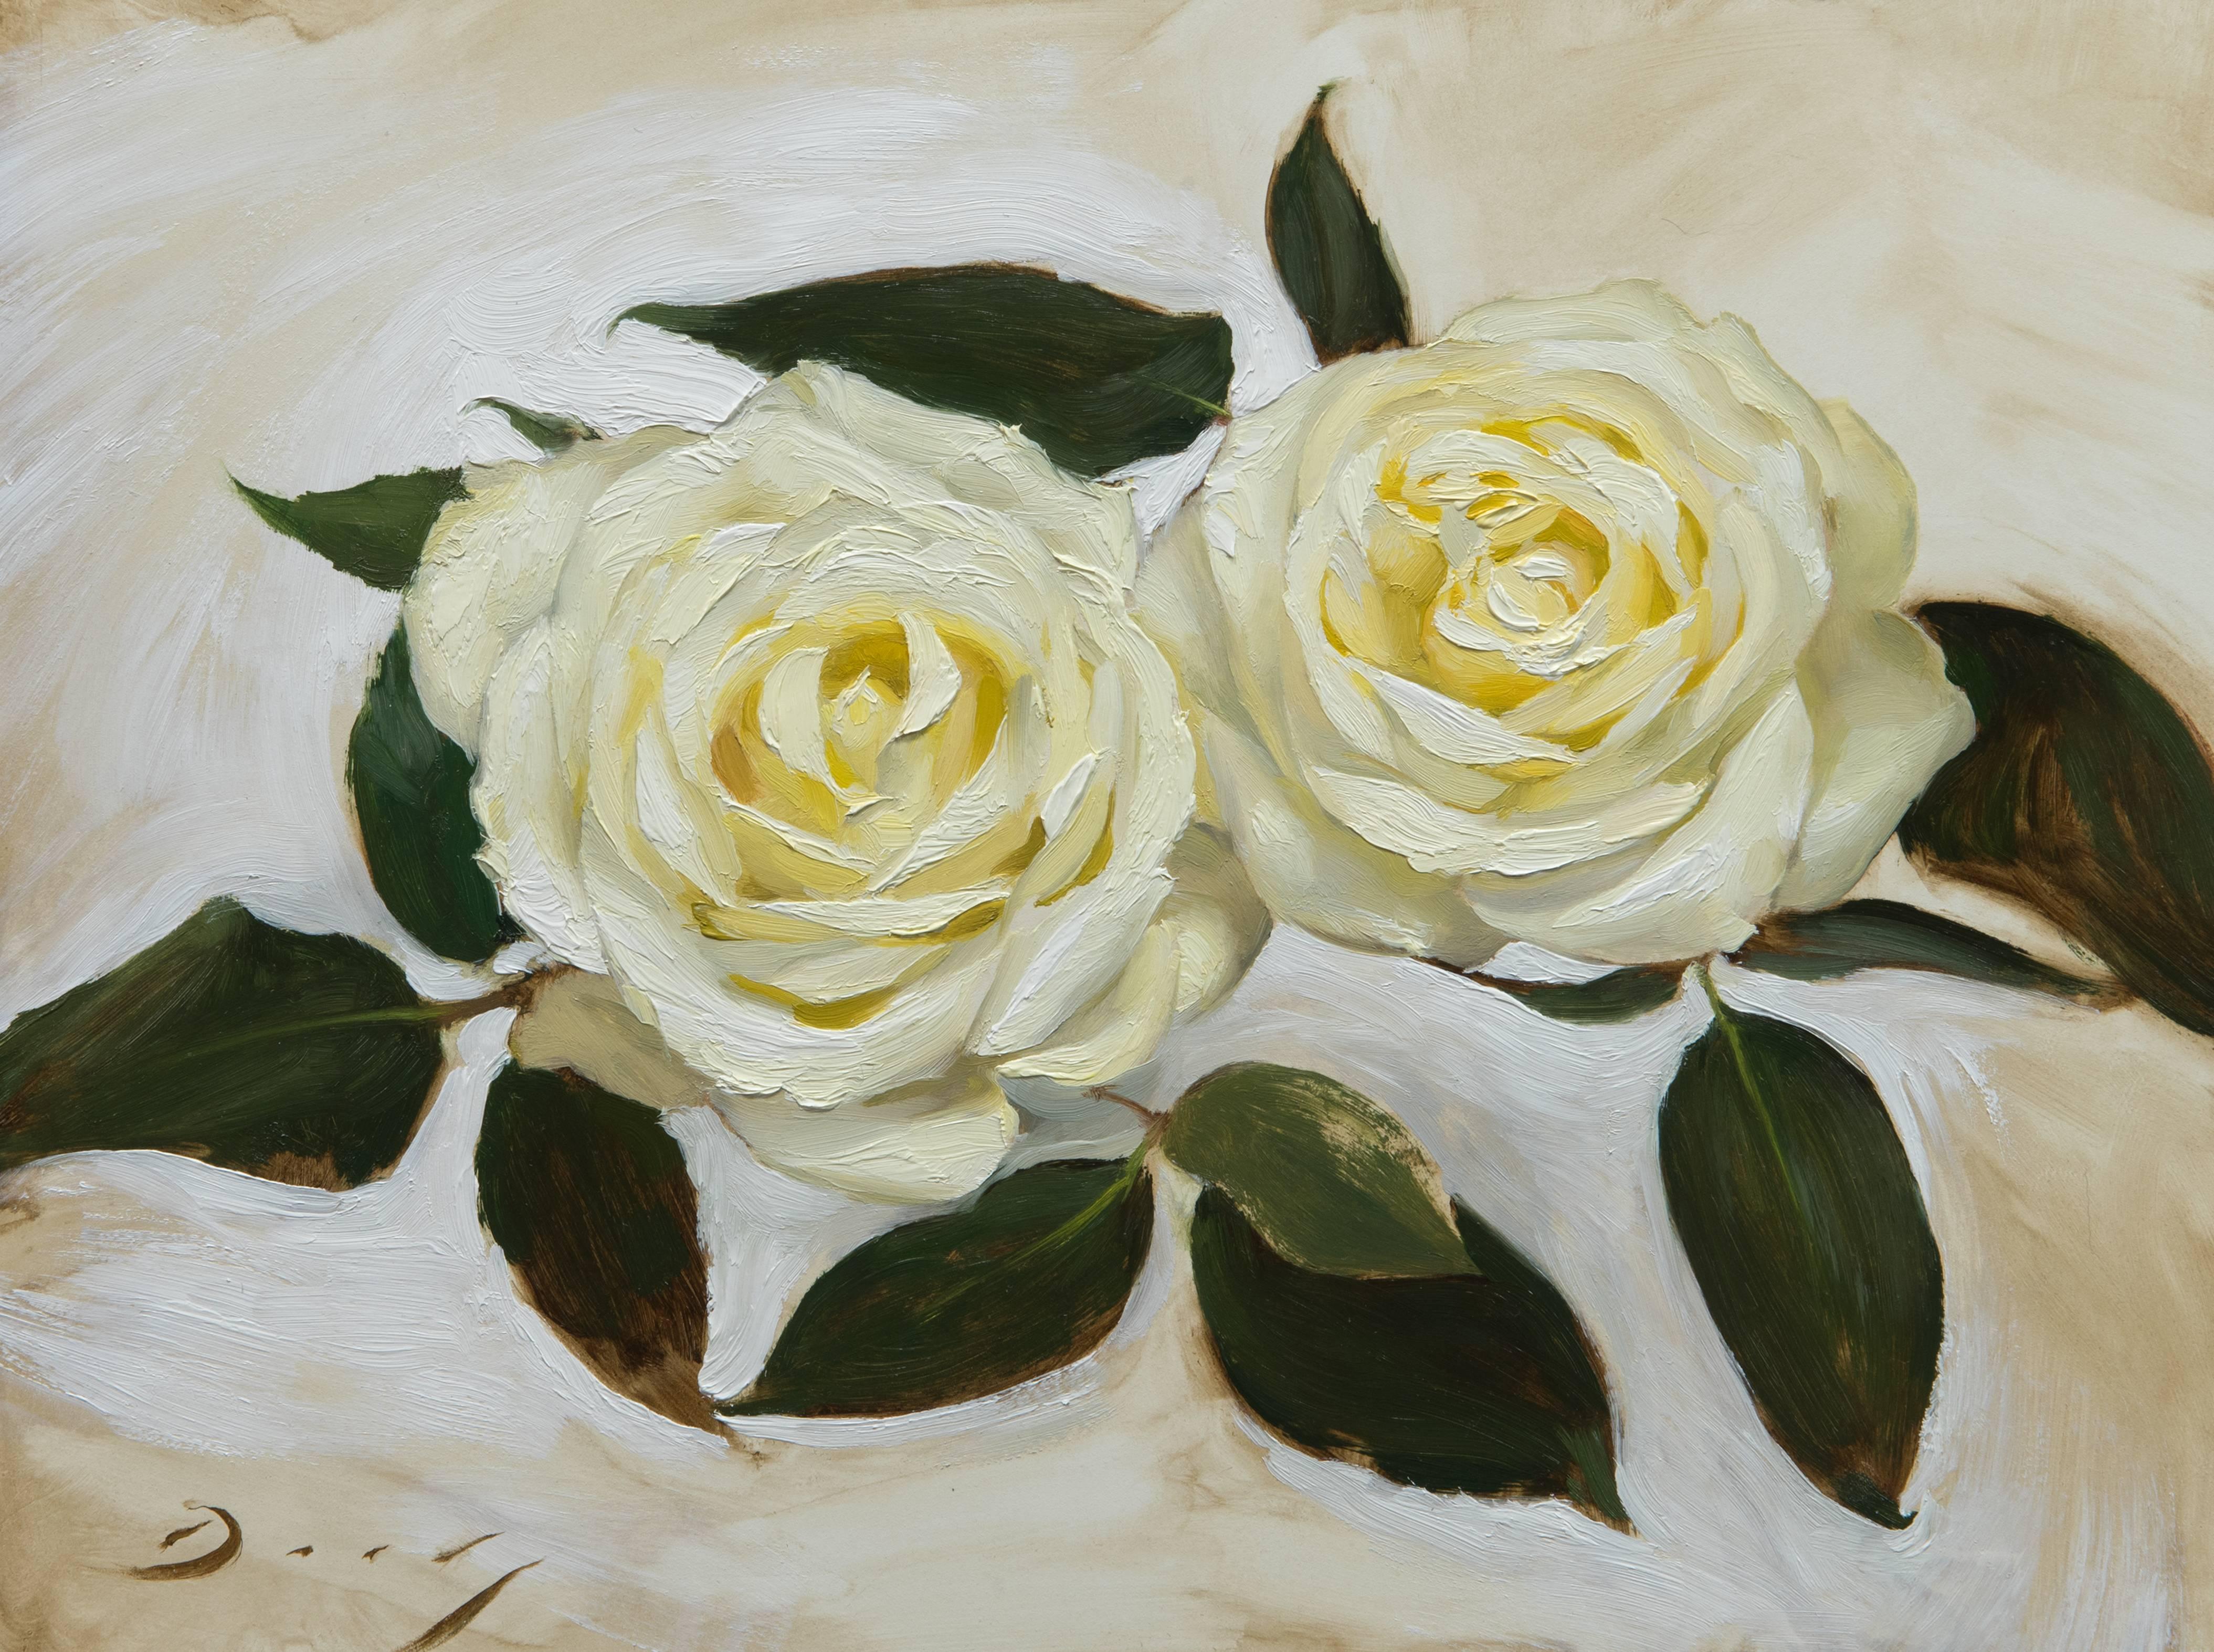 Joseph Q. Daily Still-Life Painting - Realist flowers with green and yellow, "A Pair of White Roses", oil on panel